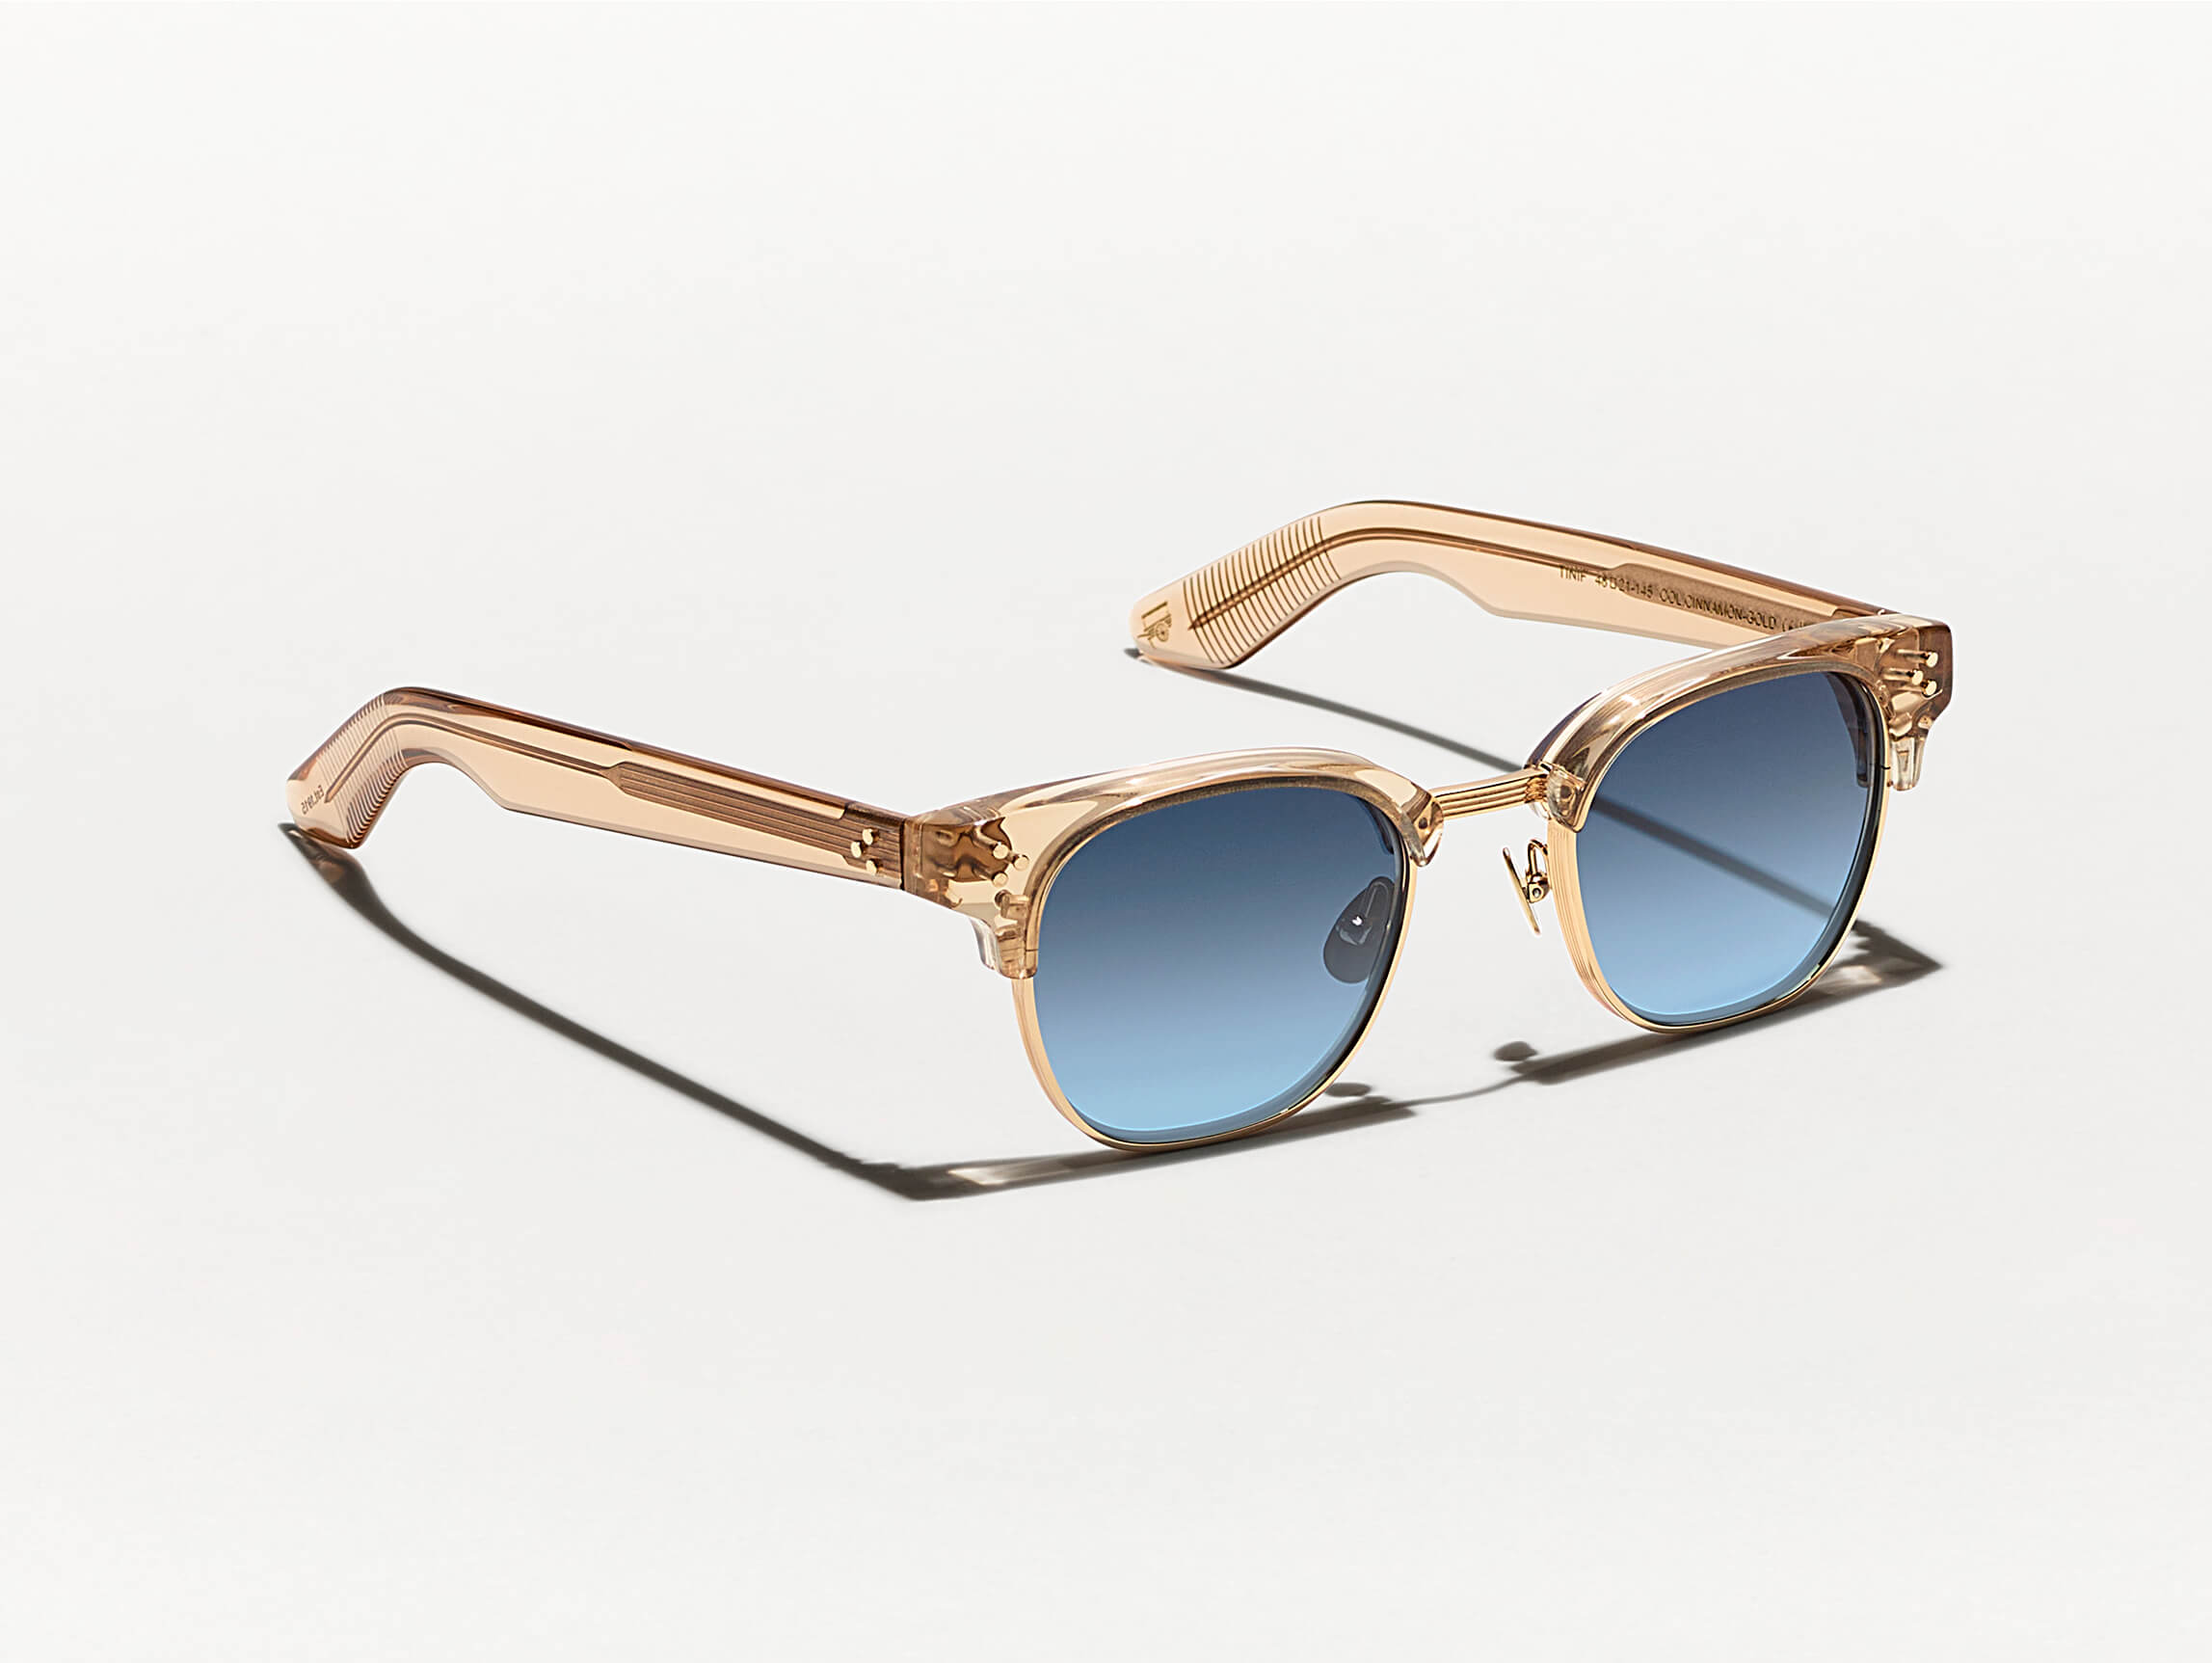 The TINIF SUN in Cinnamon/Gold with Denim Blue Tinted Lenses